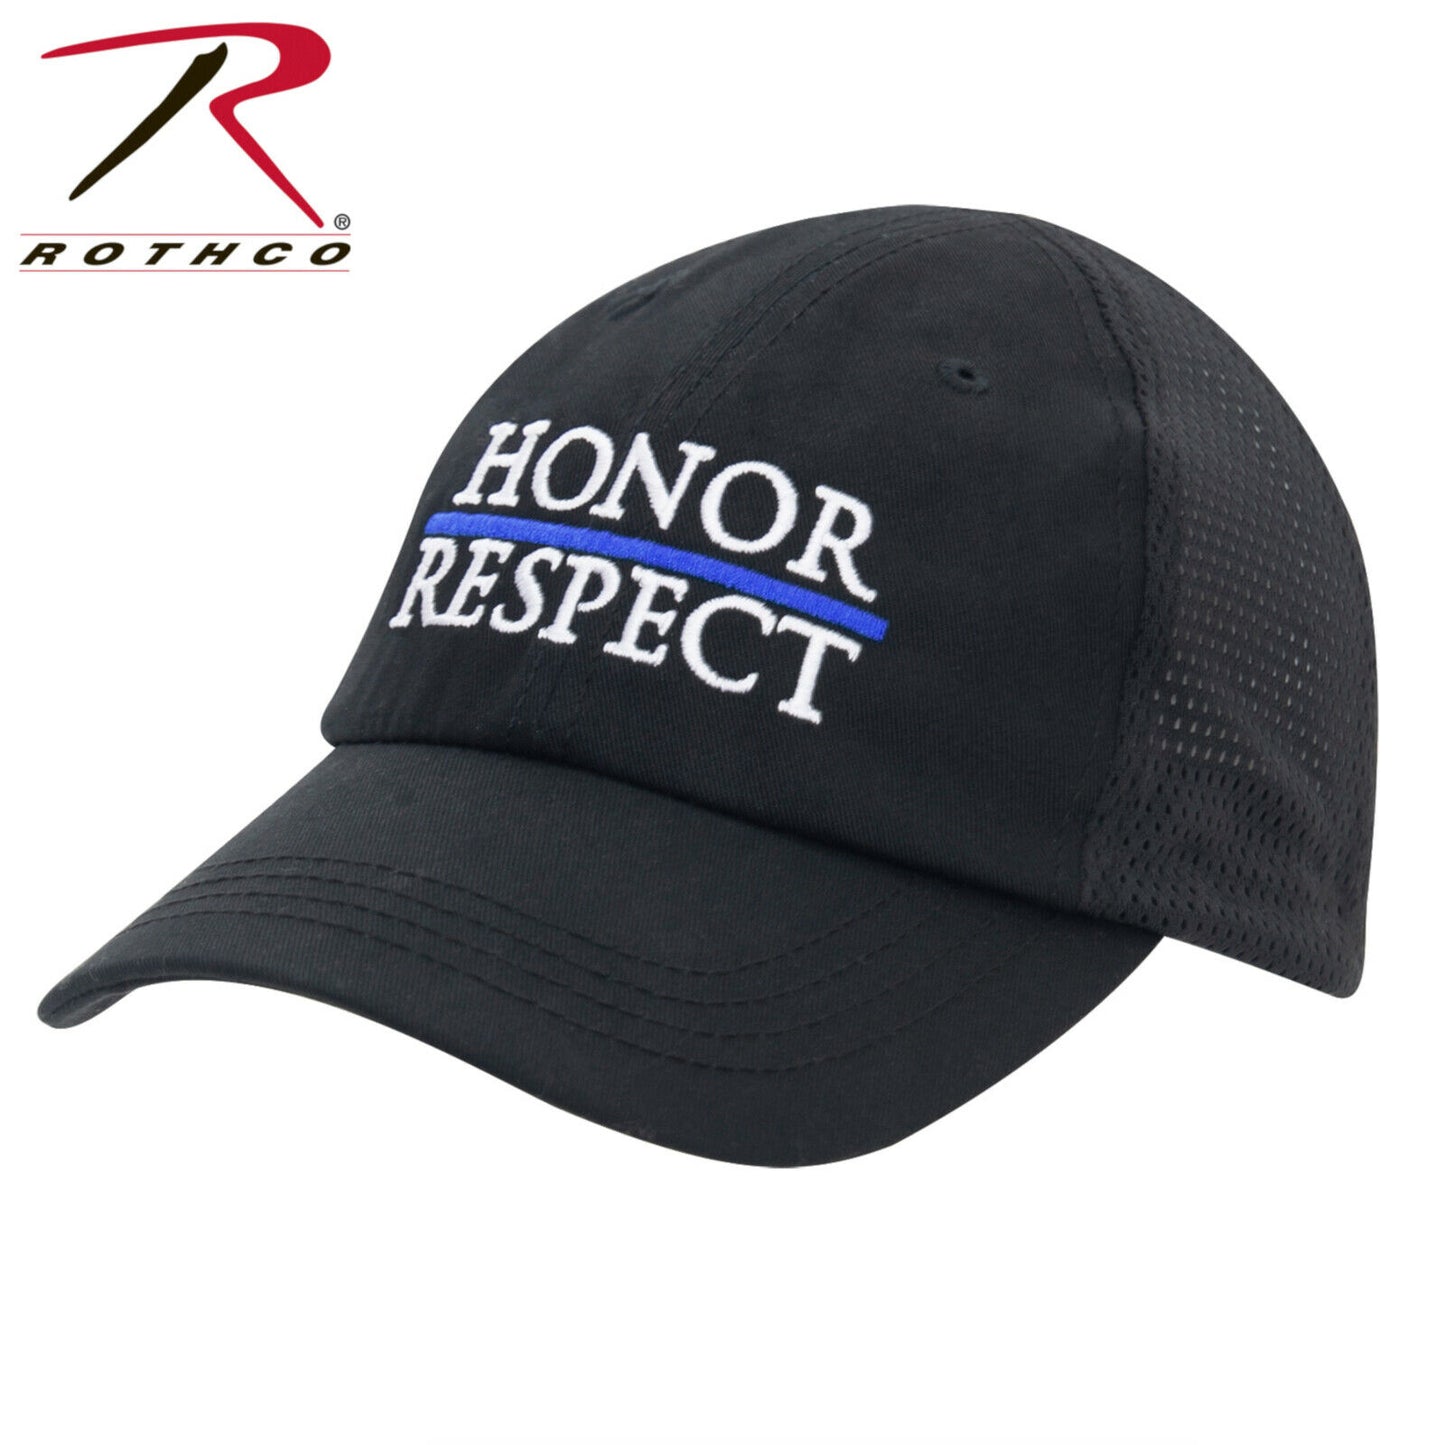 Rothco Thin Blue Line Honor & Respect Mesh Back Adjustable Tactical/Operator Cap